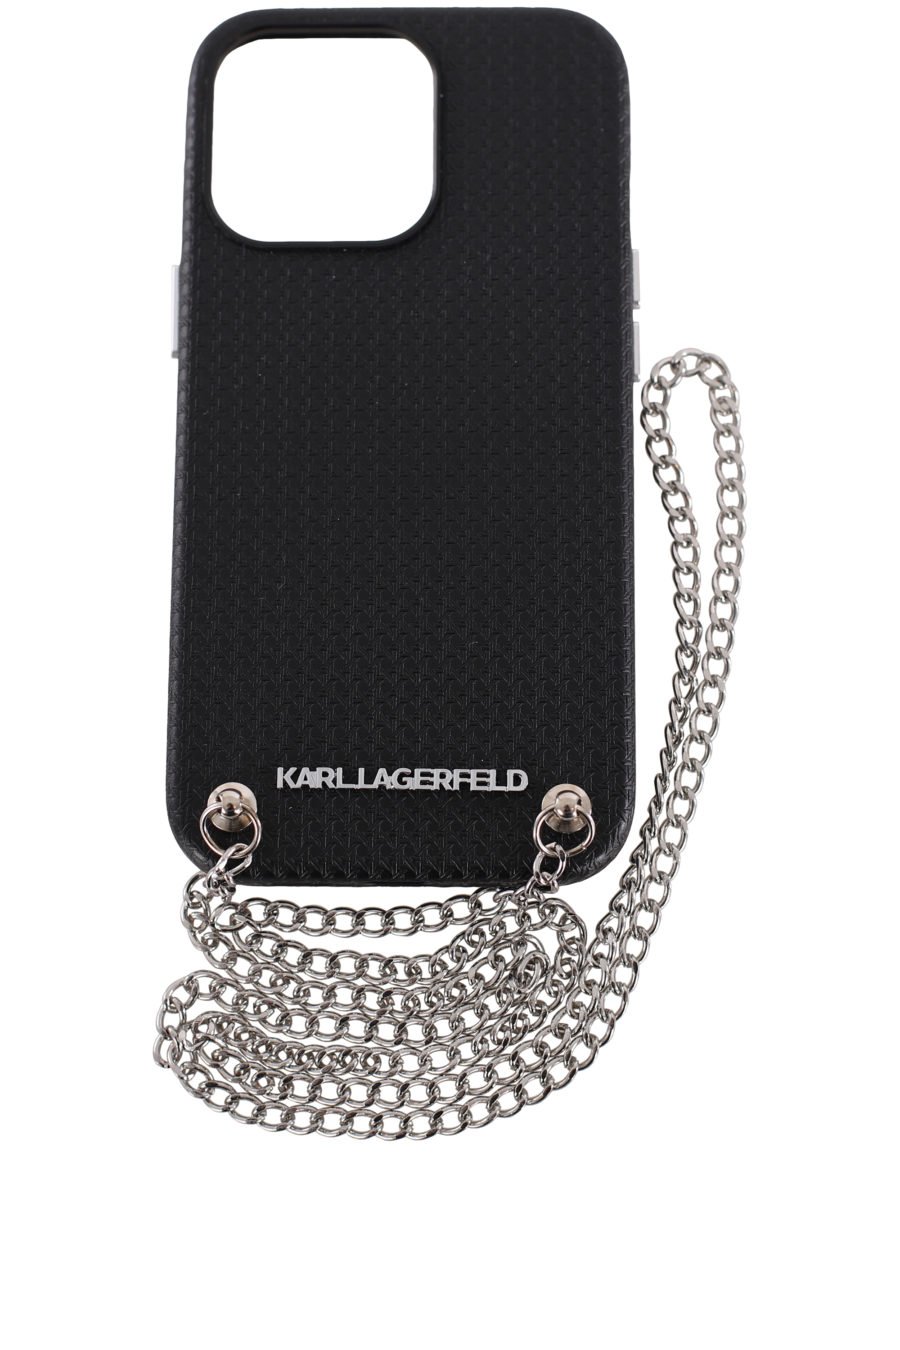 Black case with chain for iphone 13 pro - IMG 7278